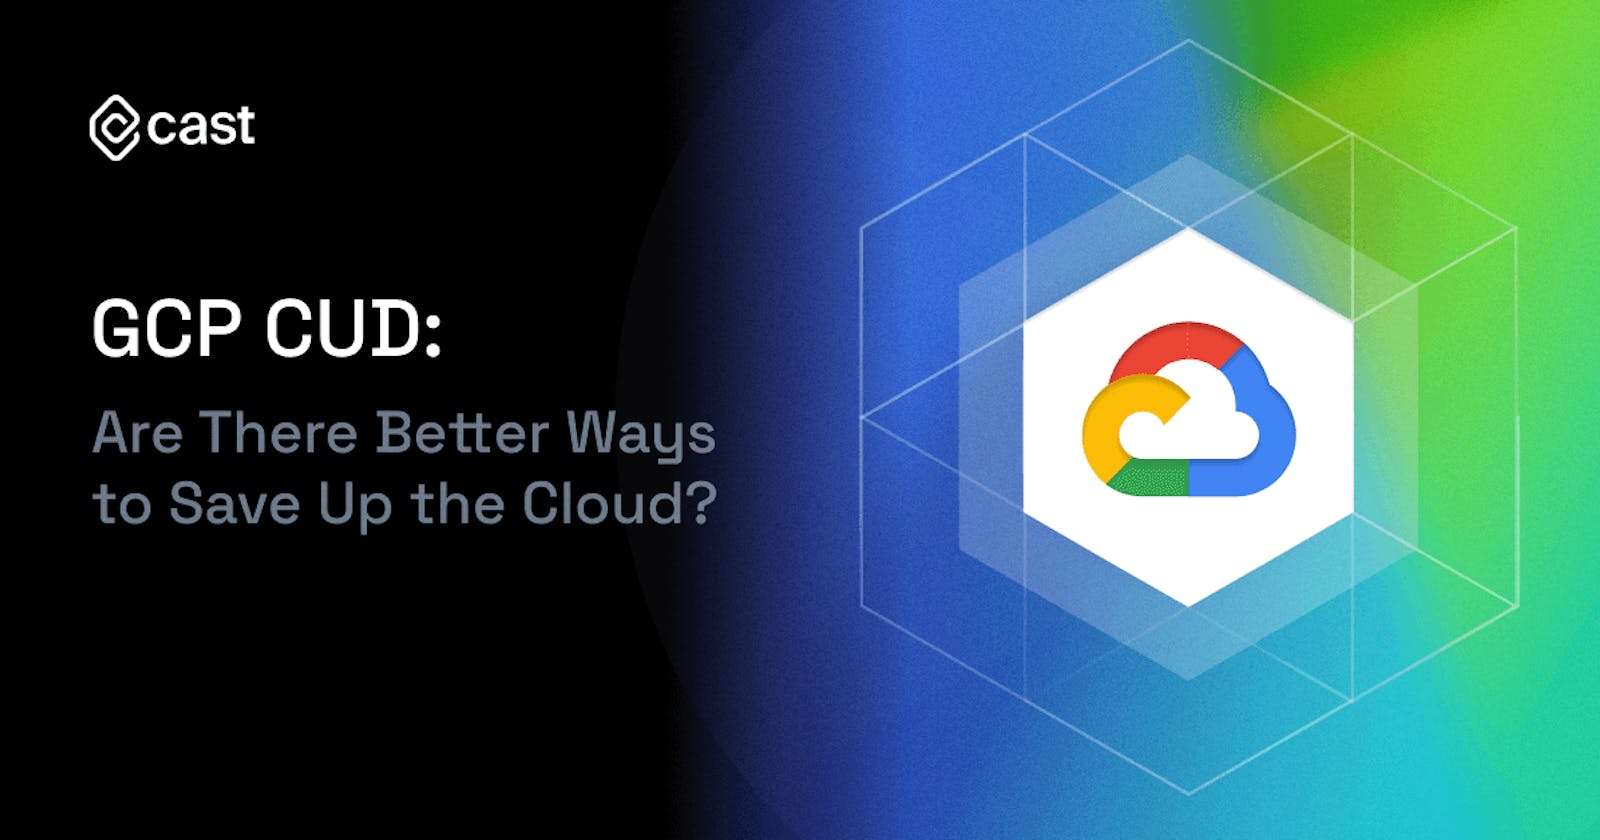 GCP CUD: Are There Better Ways to Save Up the Cloud?